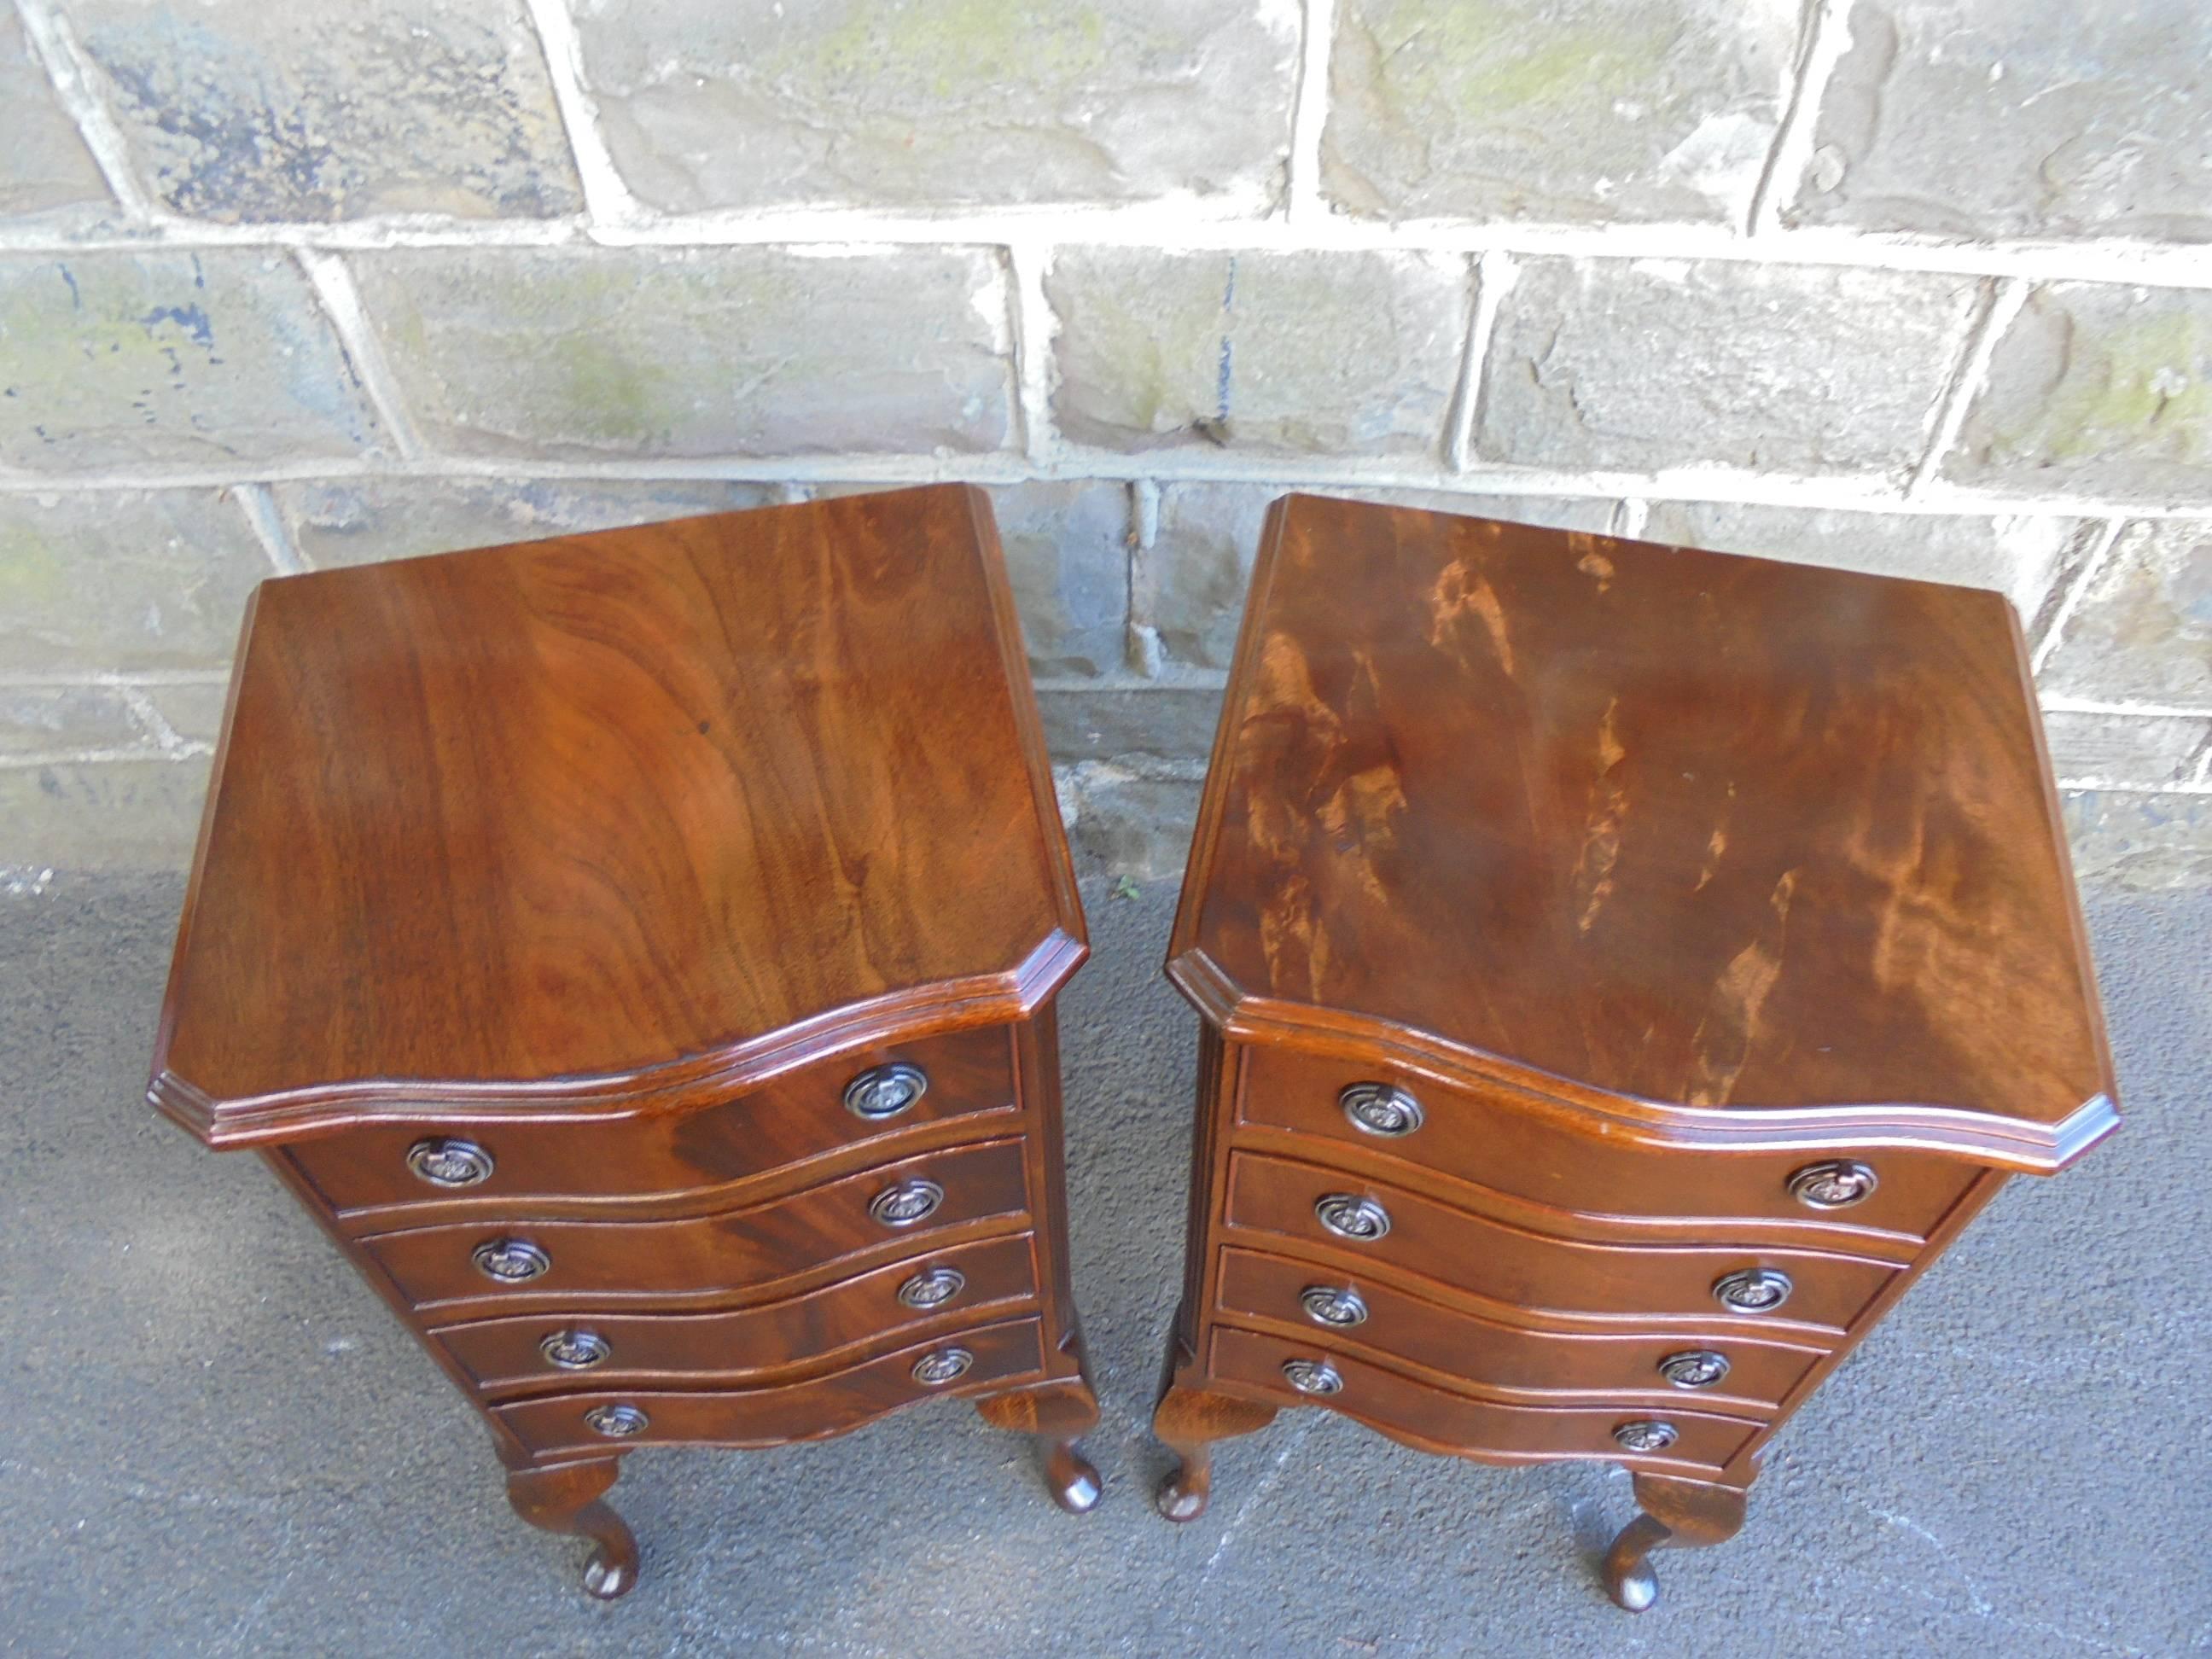 Offered for sale is this pretty pair of mahogany bedside chests

Dating from 1920. Serpentine shape front. The tops veneered in figured mahogany. Four draws with brass ring handles. Reeded column sides. Standing on slender cabriole